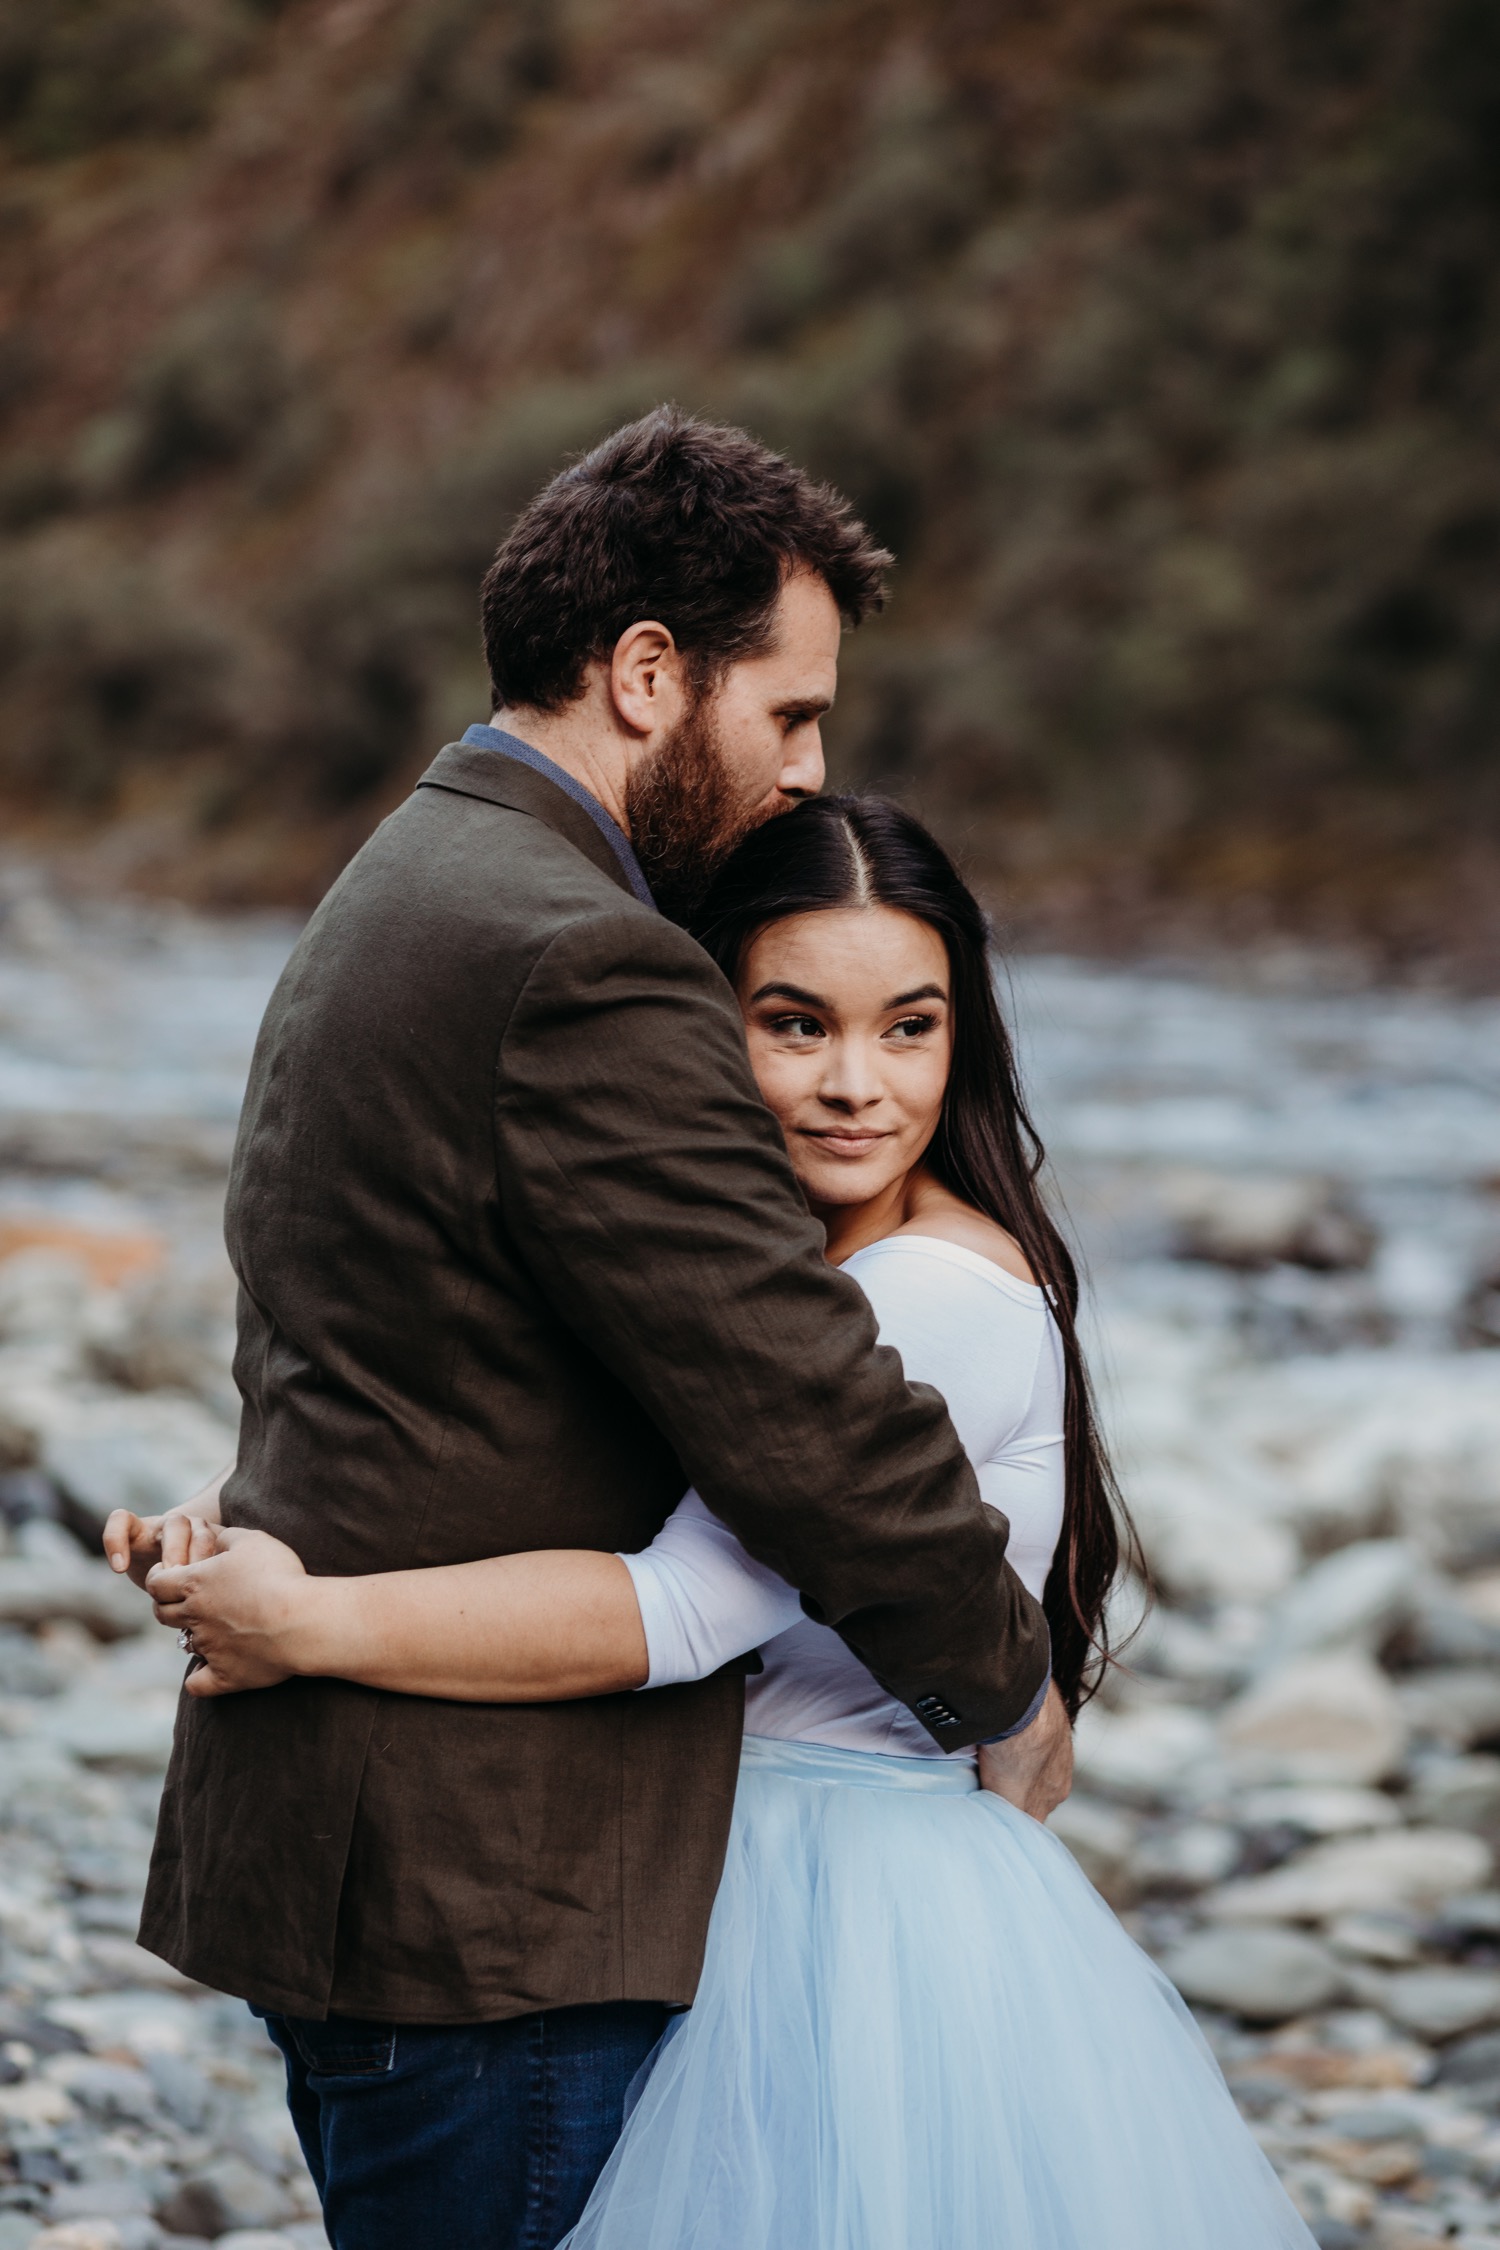 Couple embraces as the man kisses his fiance's head alongside the American River for their engagement photos.